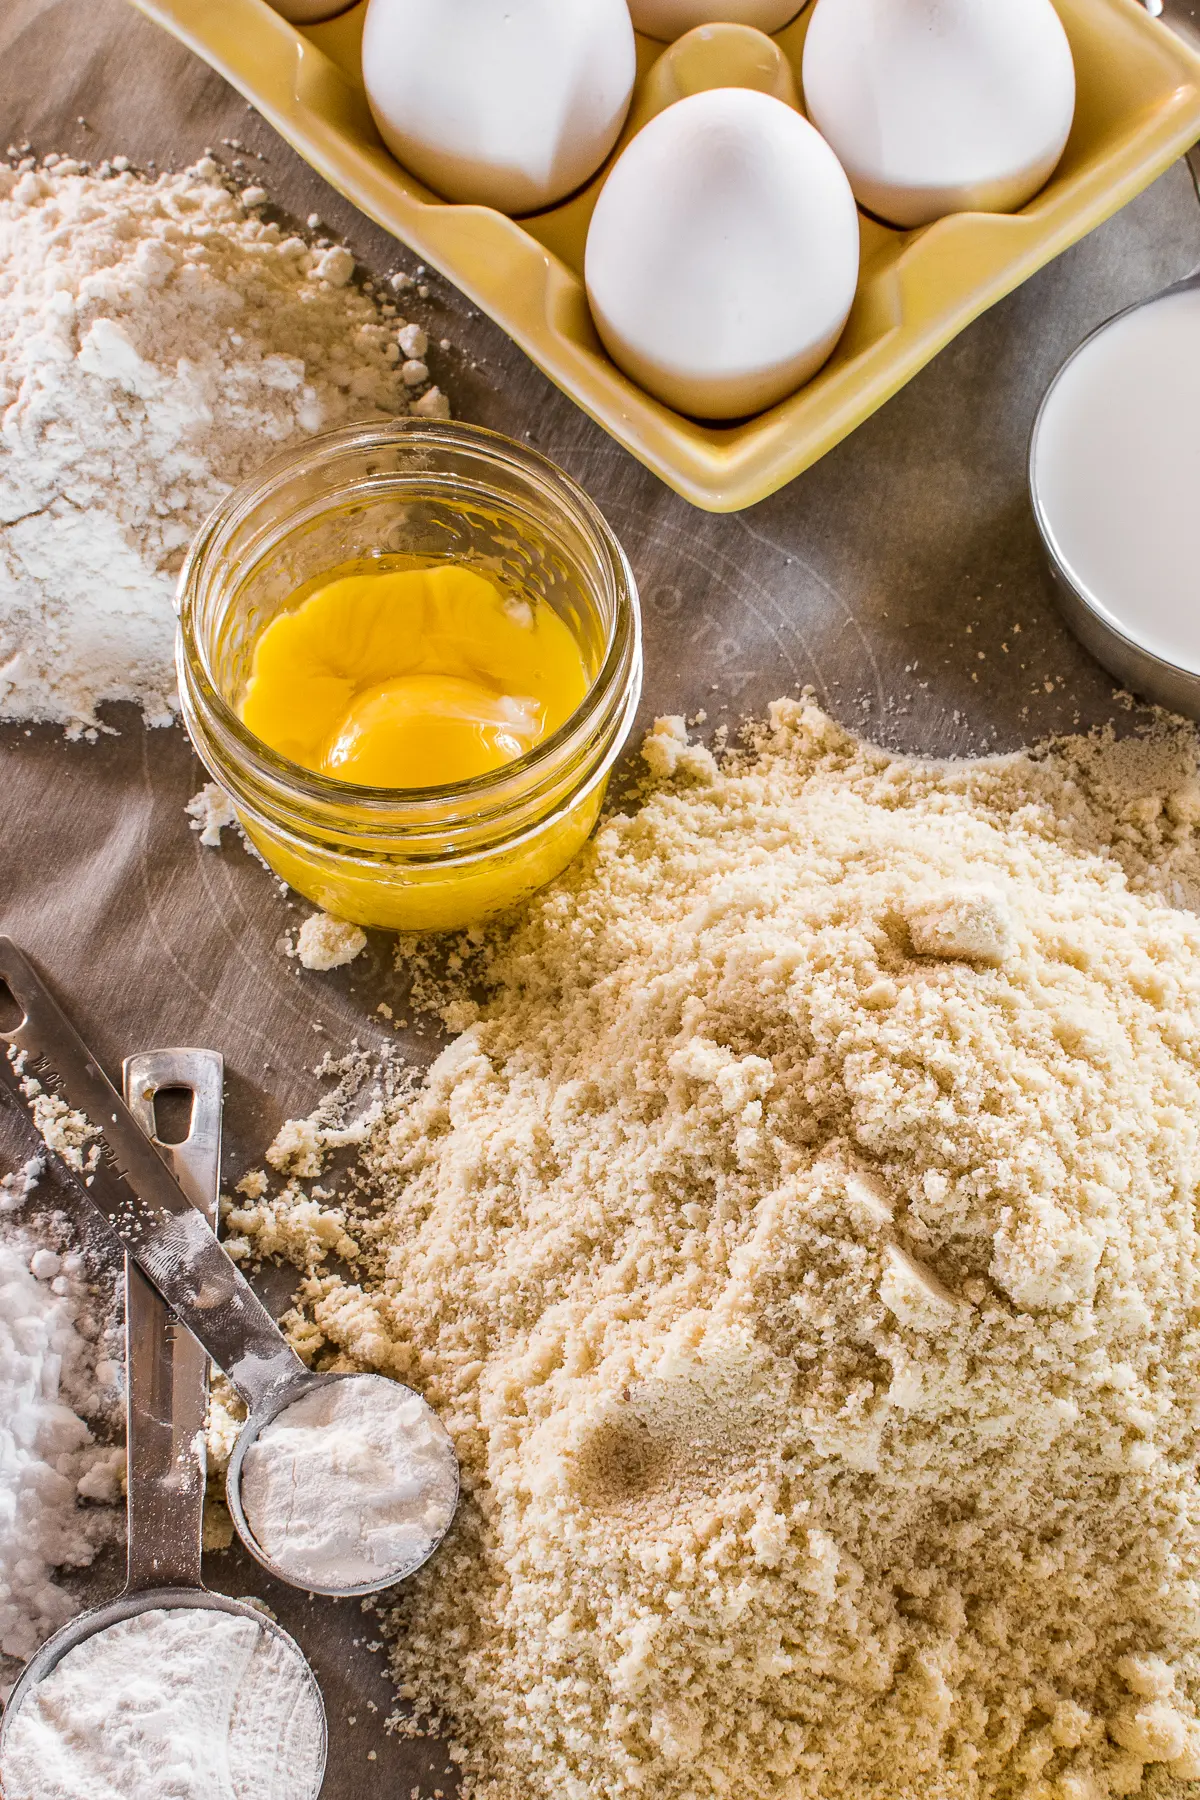 A table of baking ingredients with flours, eggs, and measuring spoons